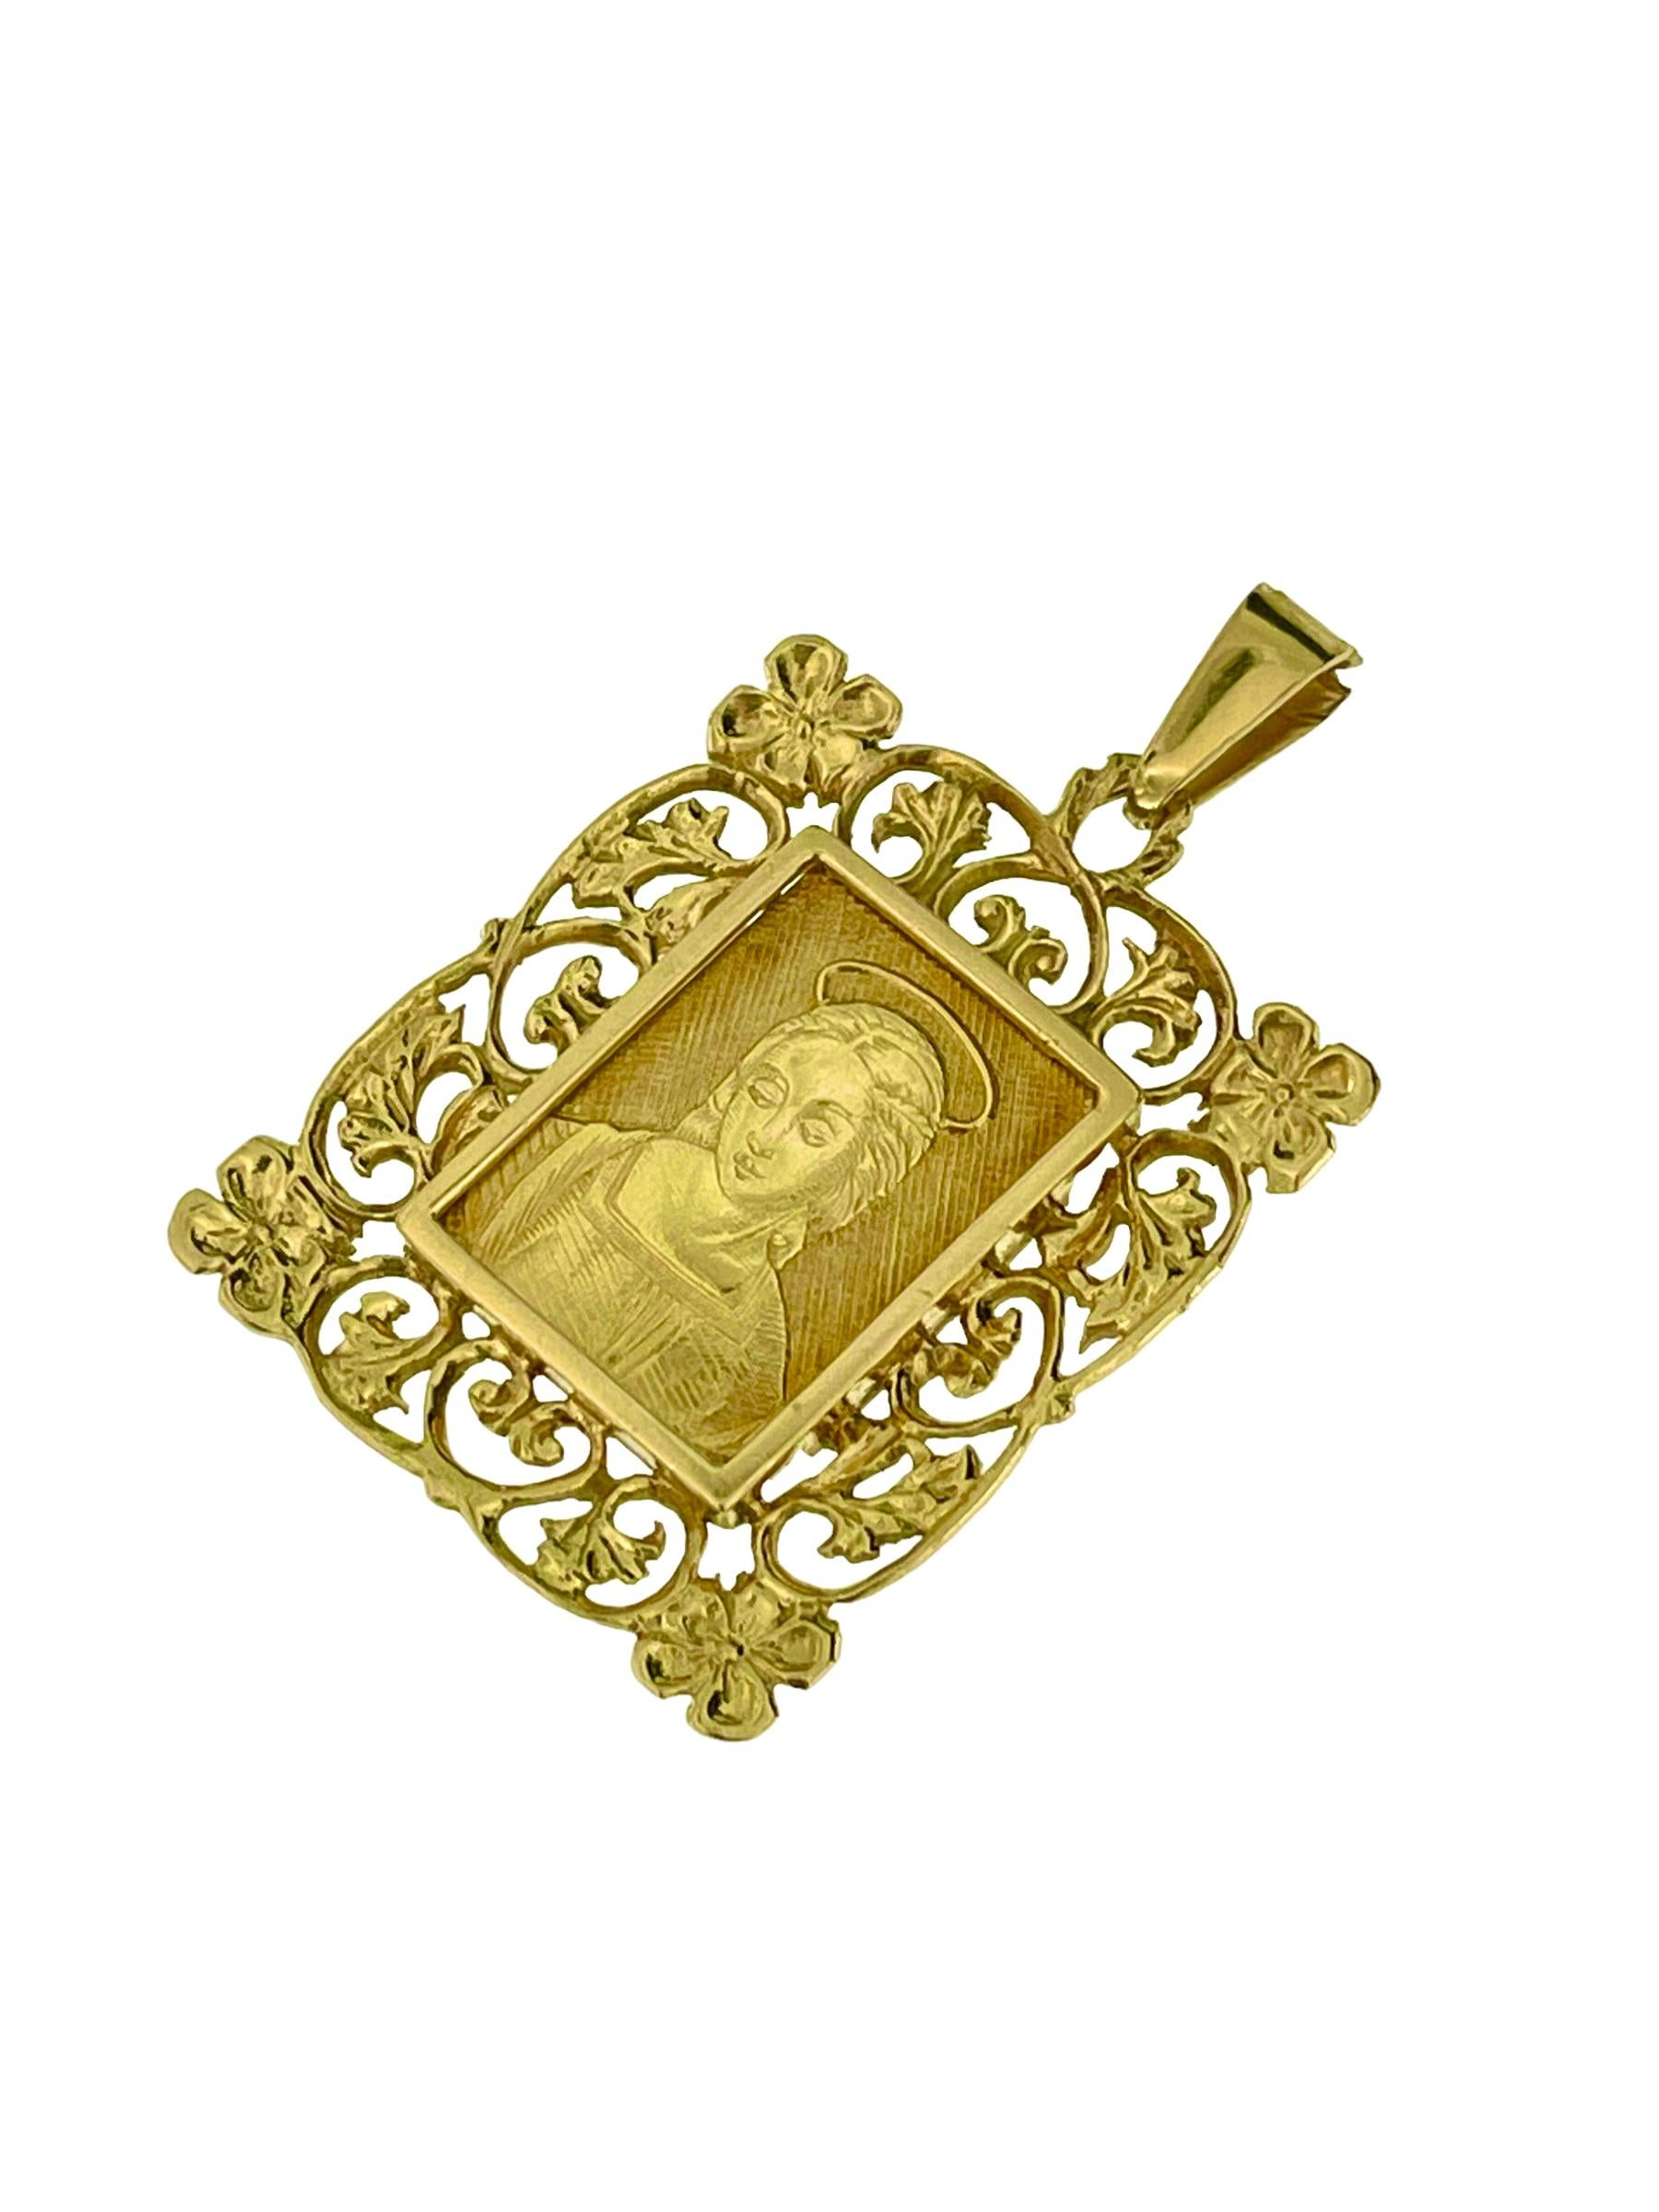 Antique Yellow Gold Pendant representing Raphael's Madonna of the Goldfinch For Sale 1